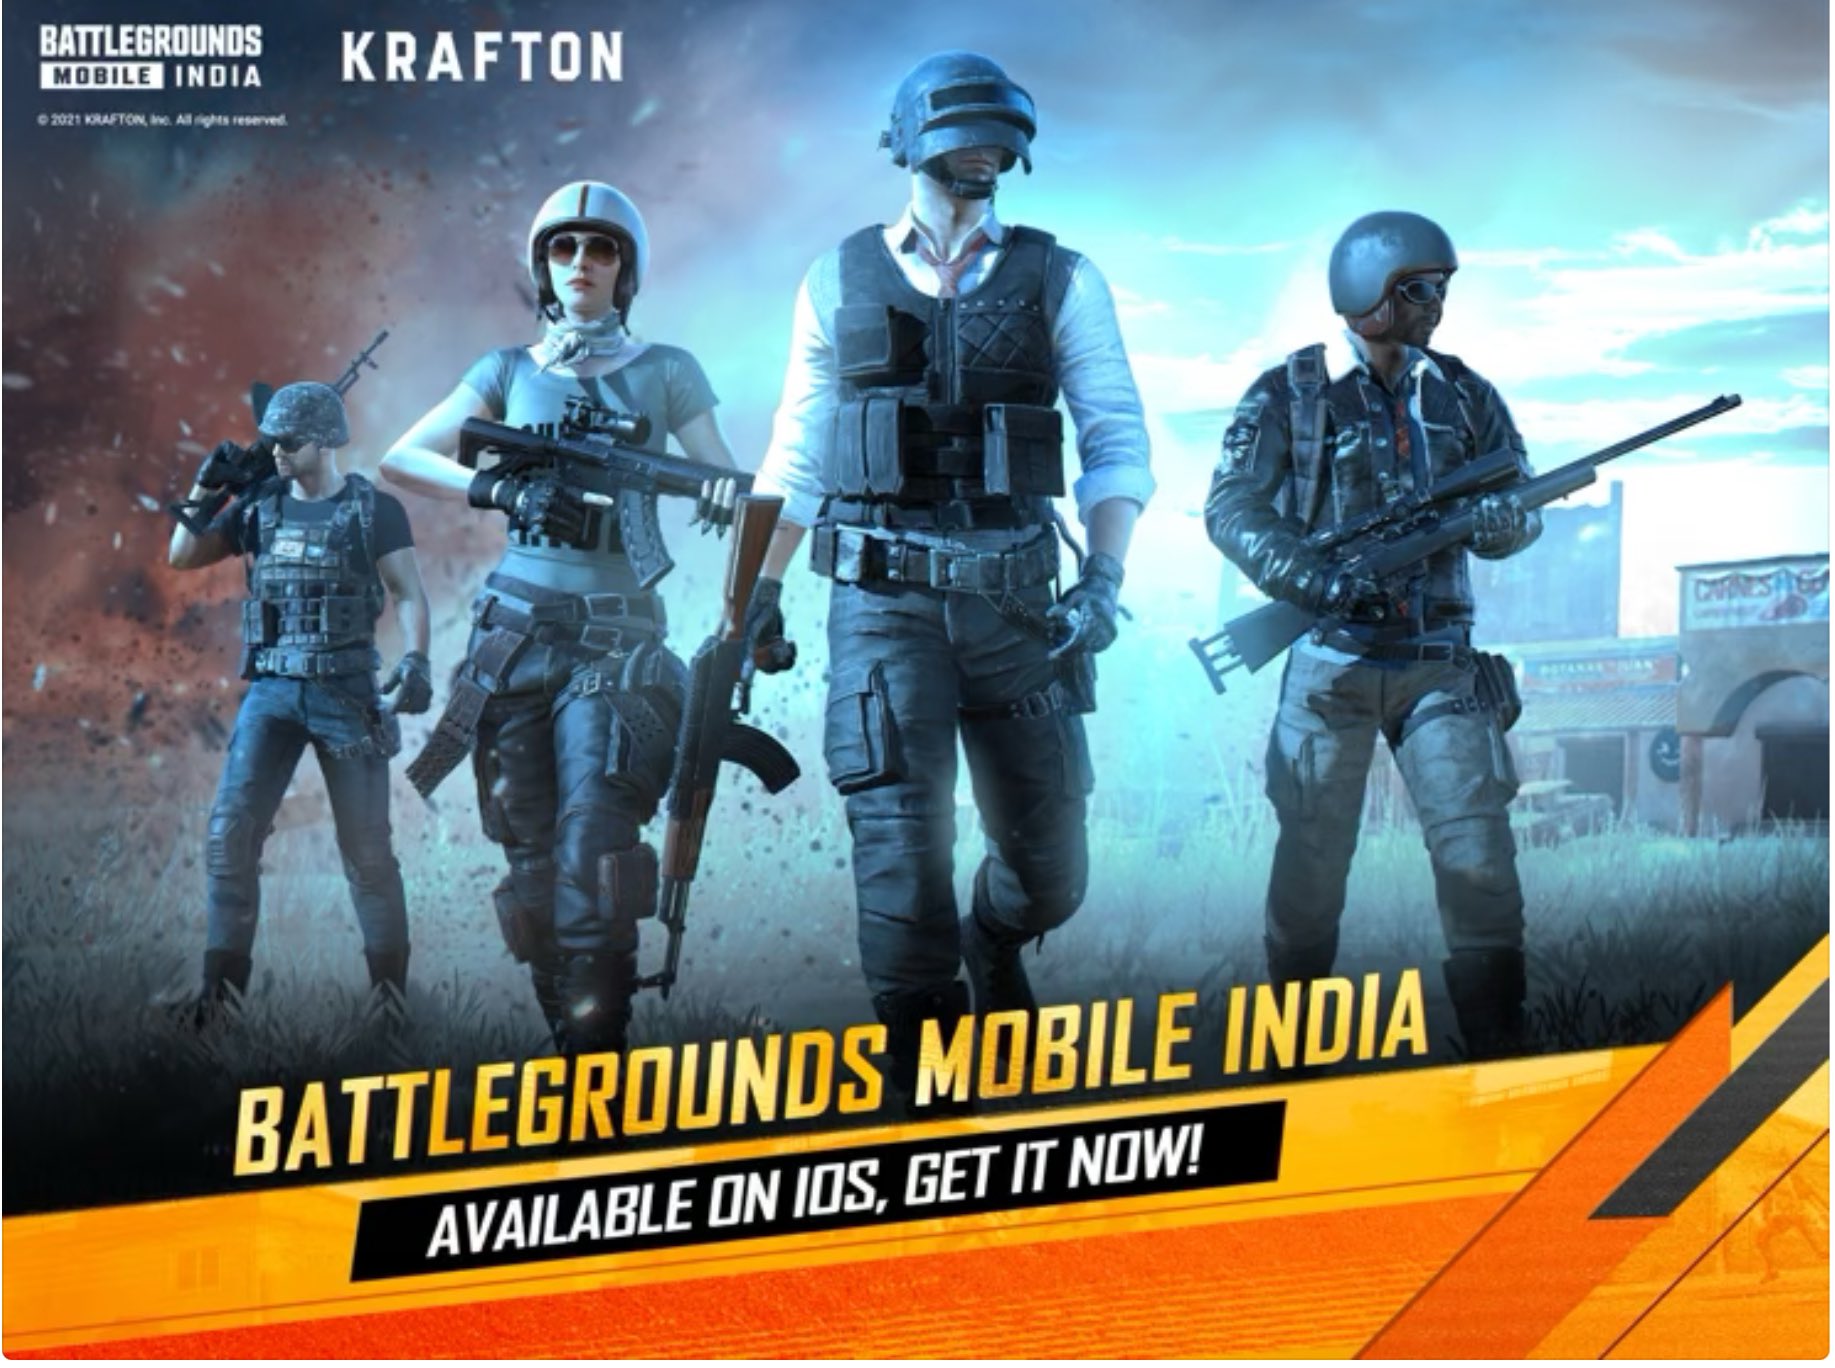 BGMI IOS RELEASE: Krafton Launches Battlegrounds Mobile India for iOS devices